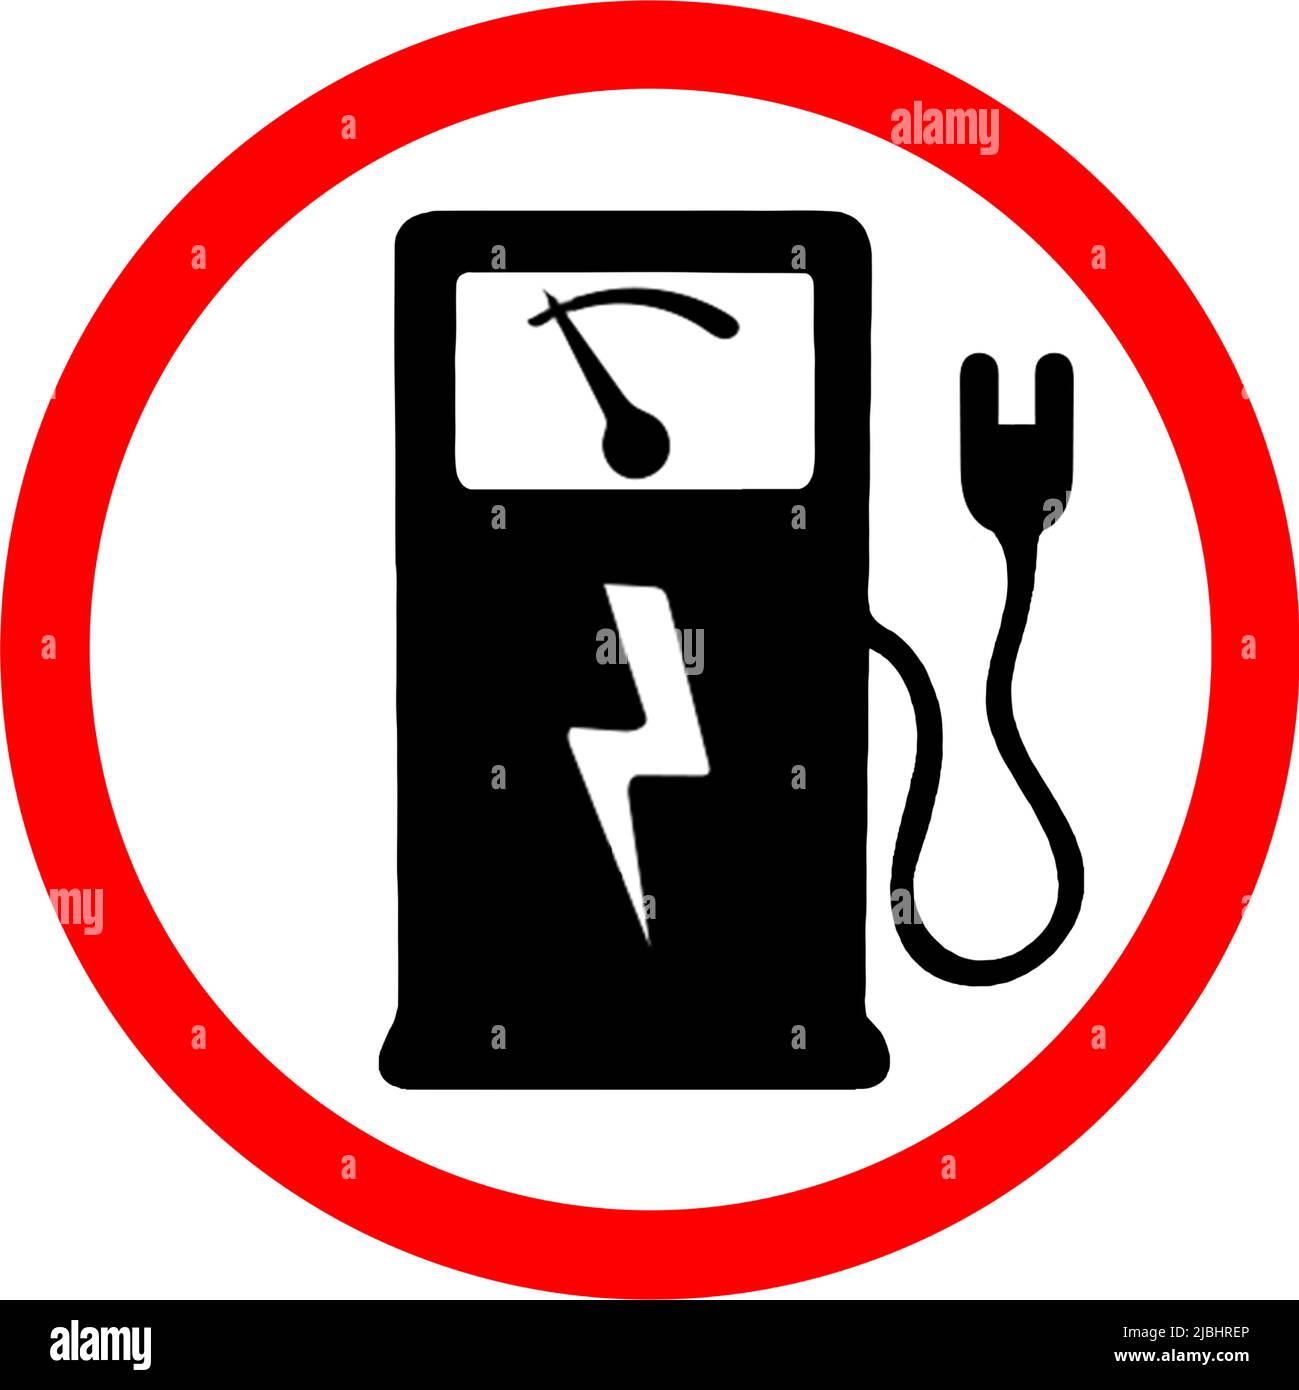 e car, electric car allowed charging station Road signs Stock Vector